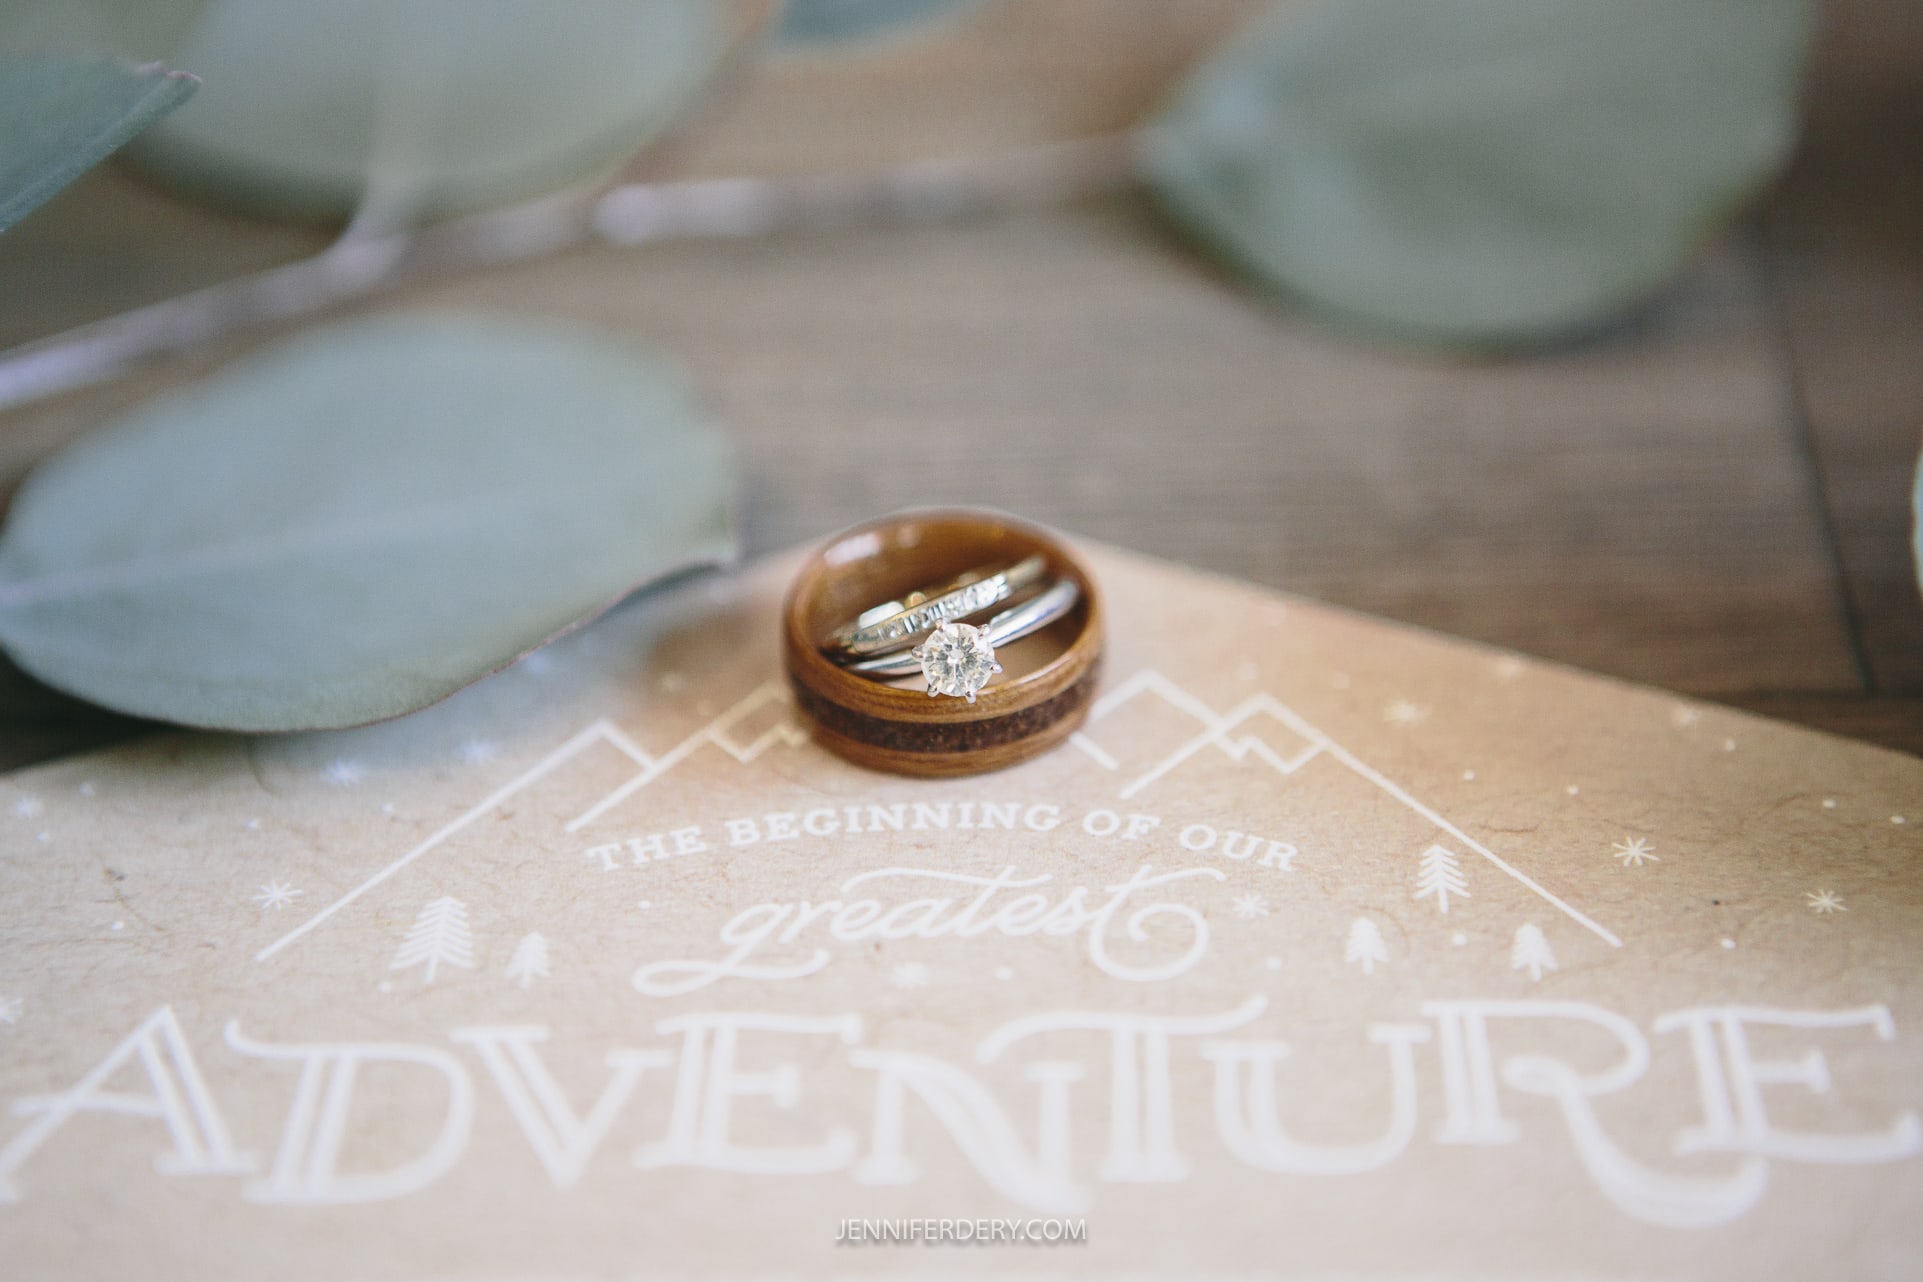 using a macro lens to photograph nested wedding rings sitting on a wedding invitation